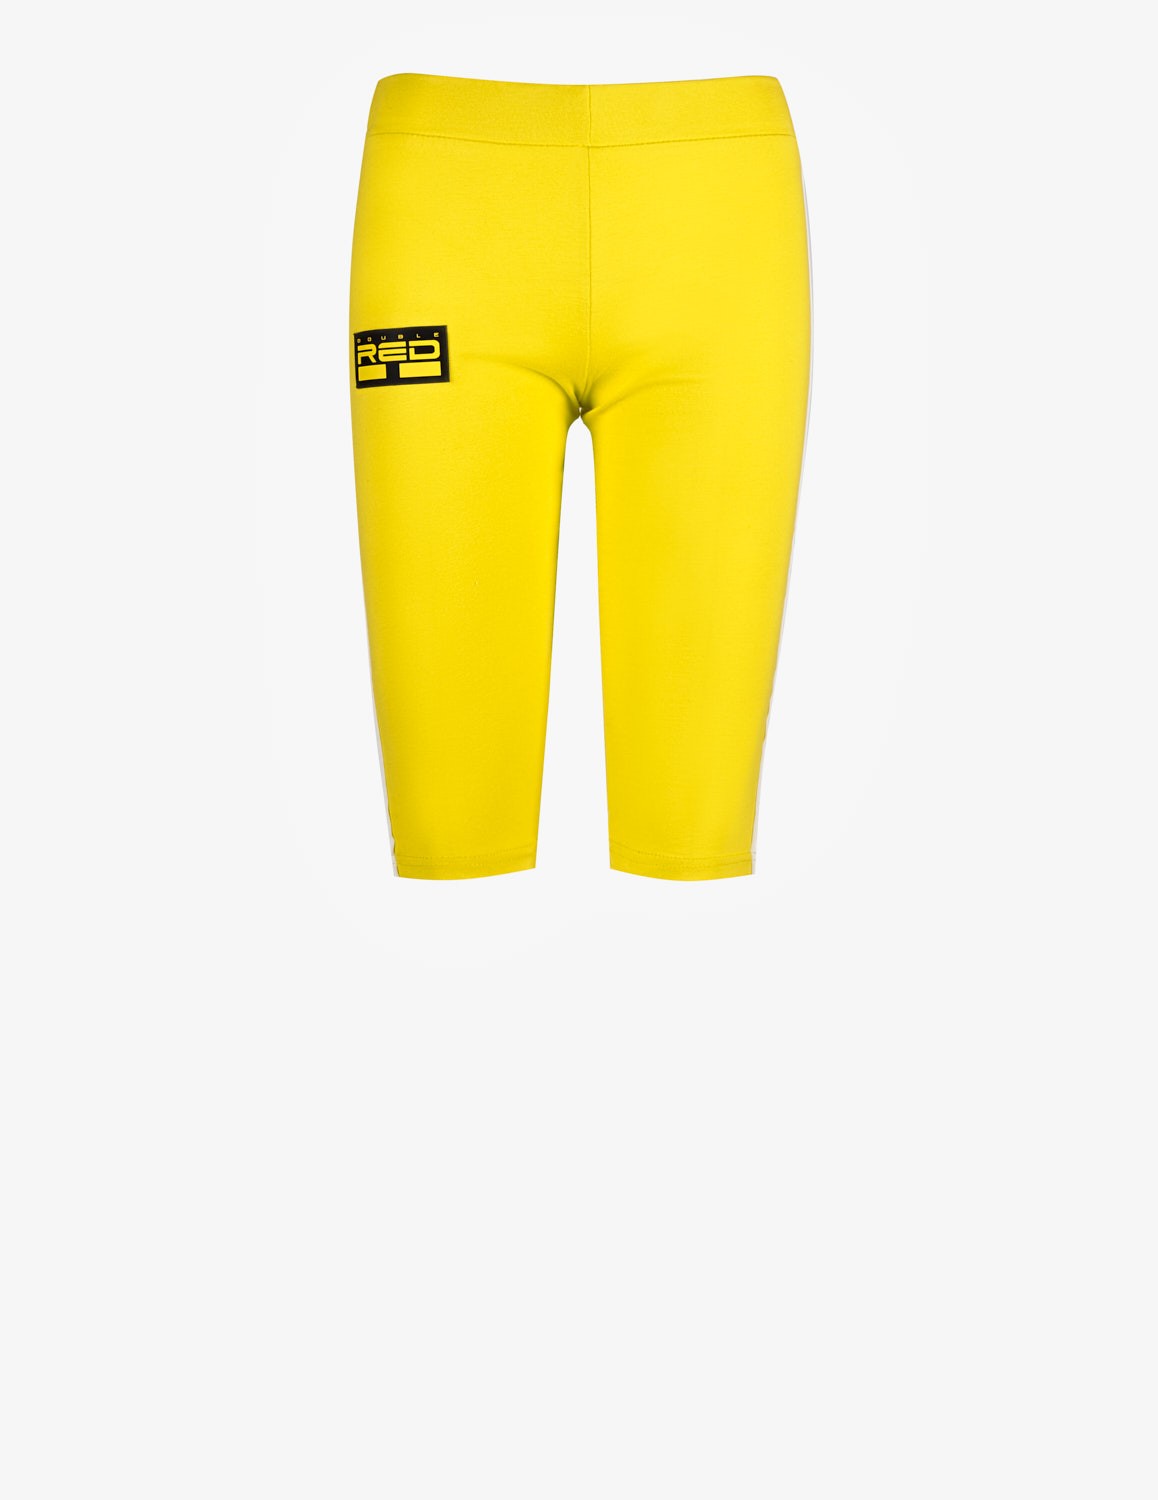 Leggins SPORT IS YOUR GANG™ Yellow